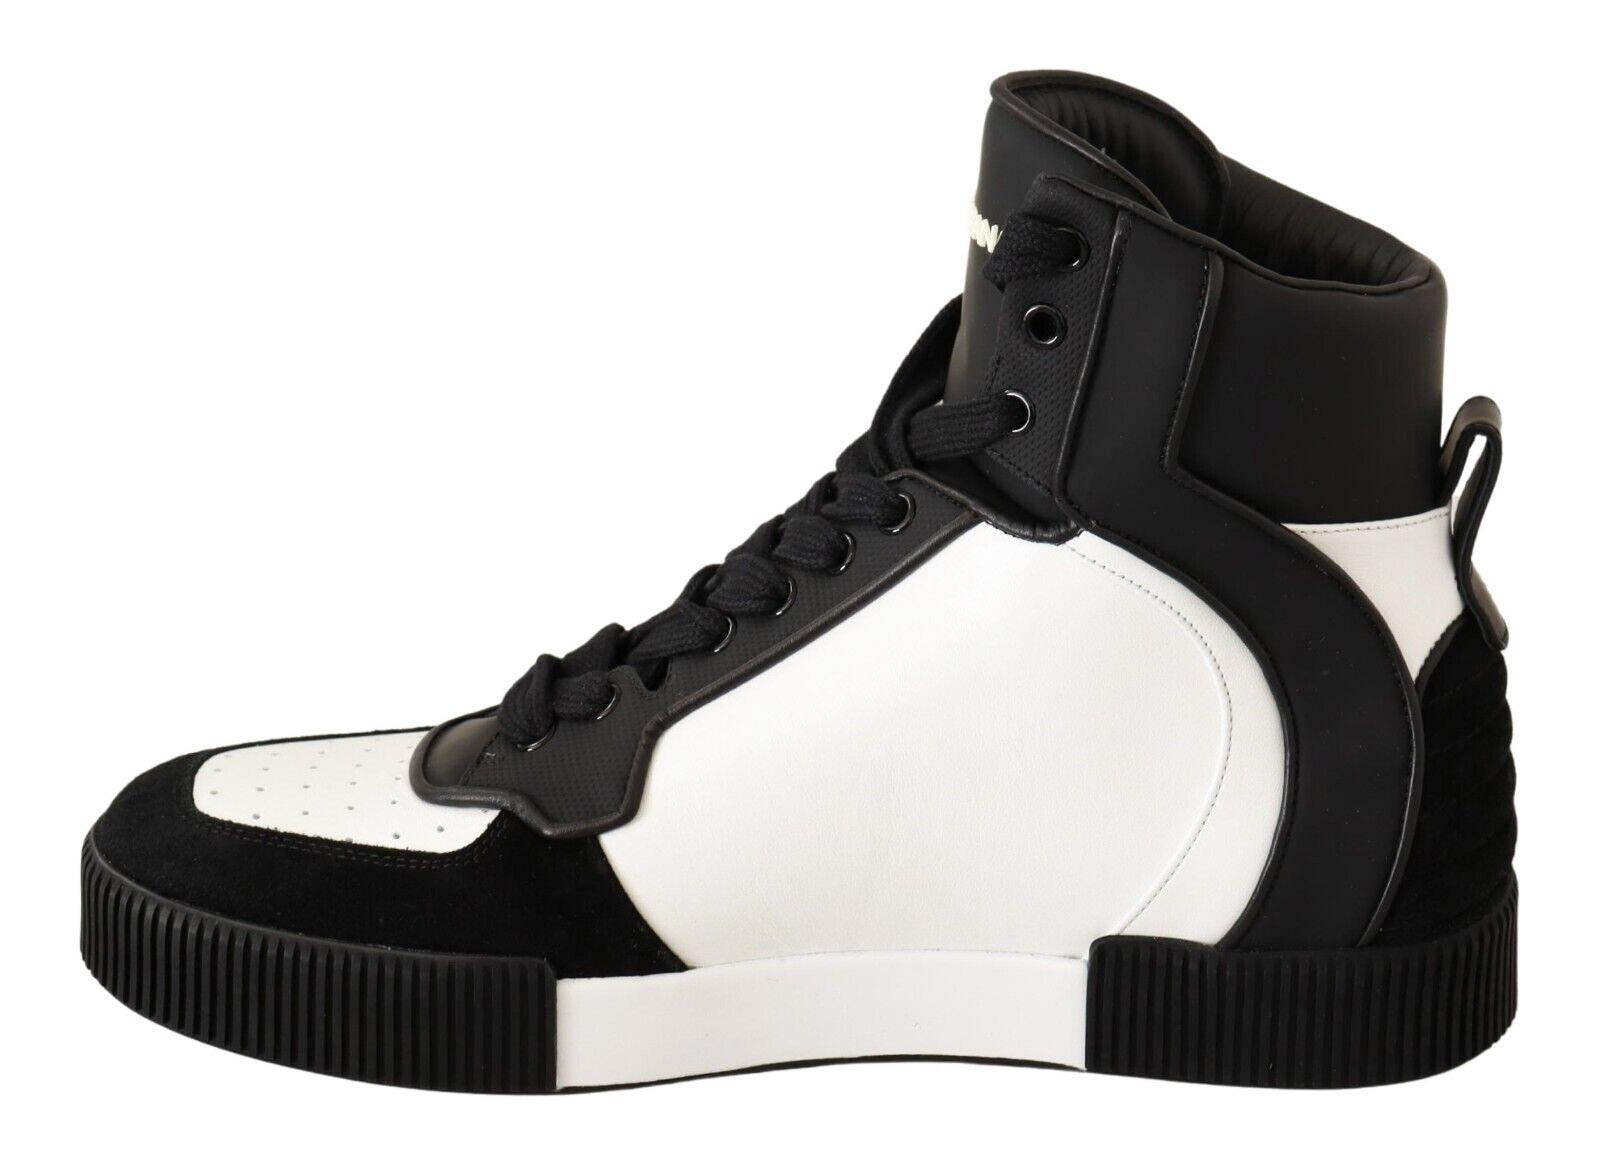 DOLCE & GABBANA

Gorgeous brand new with tags, 100% Authentic Dolce & Gabbana High top sneakers MIAMI made of leather and suede.


Model: High Top Sneakers

Color: Black and white

Material: 100% Leather

Rubber sole

Logo details

Made in